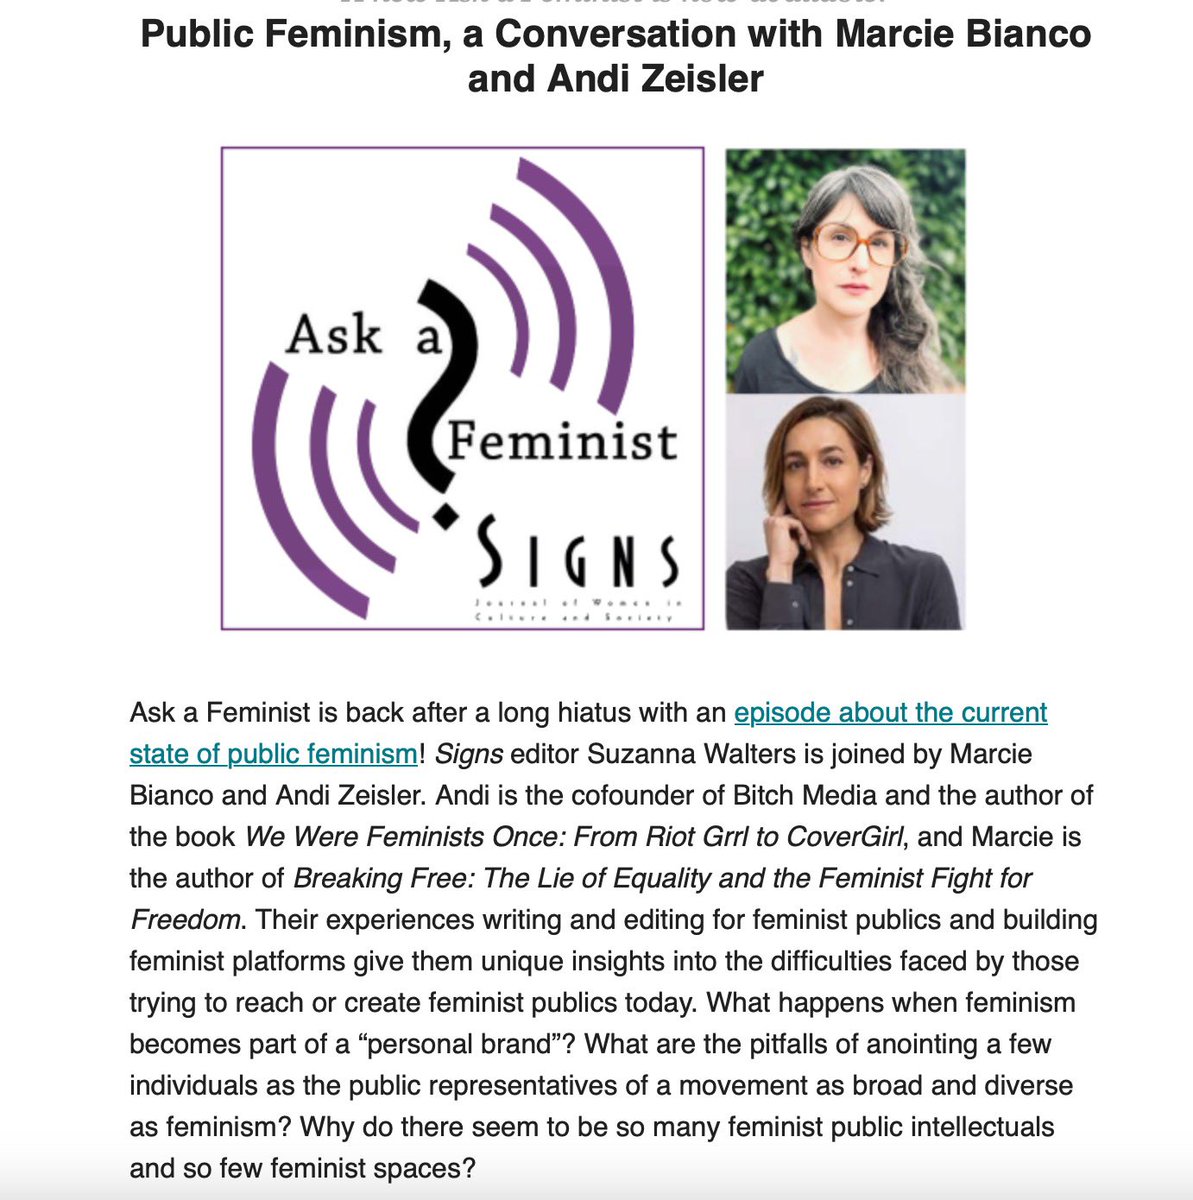 An absolute honor and delight to speak with @andizeisler & Suzanna Walters about public feminism and the idea of a feminist public intellectual